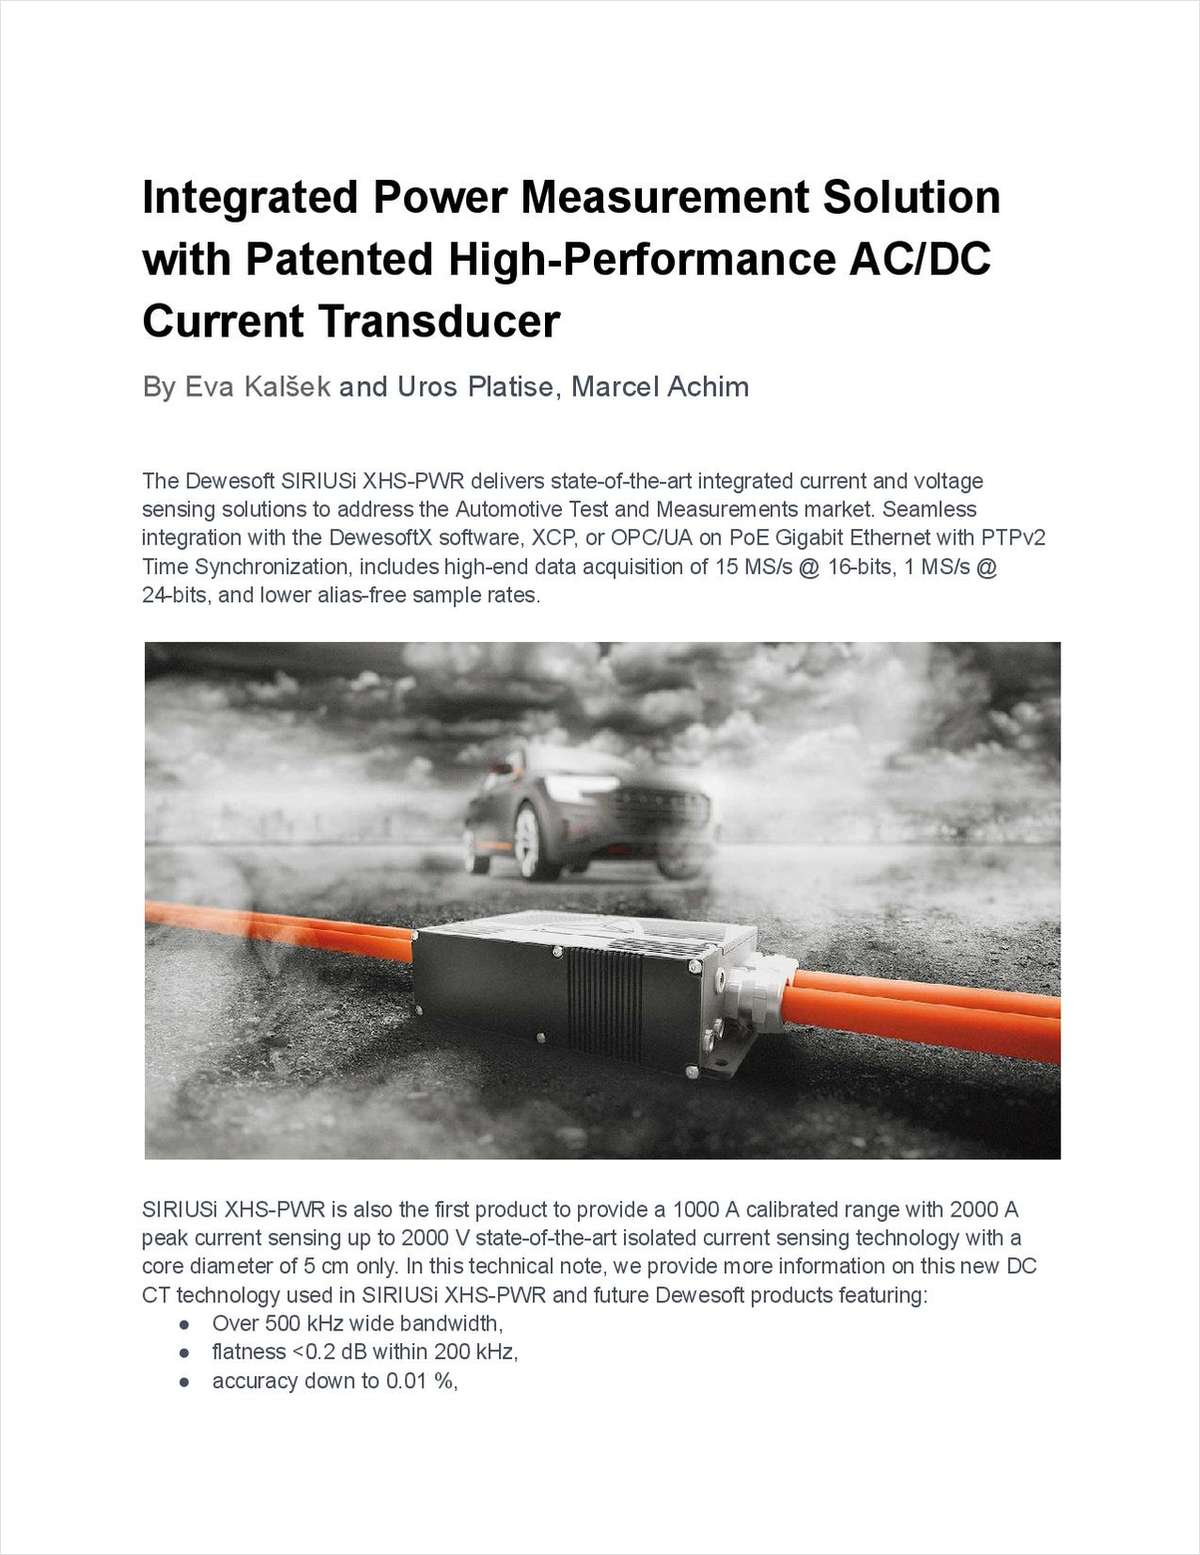 Integrated Power Measurement Solution: A New High-Performance AC/DC Current Transducer